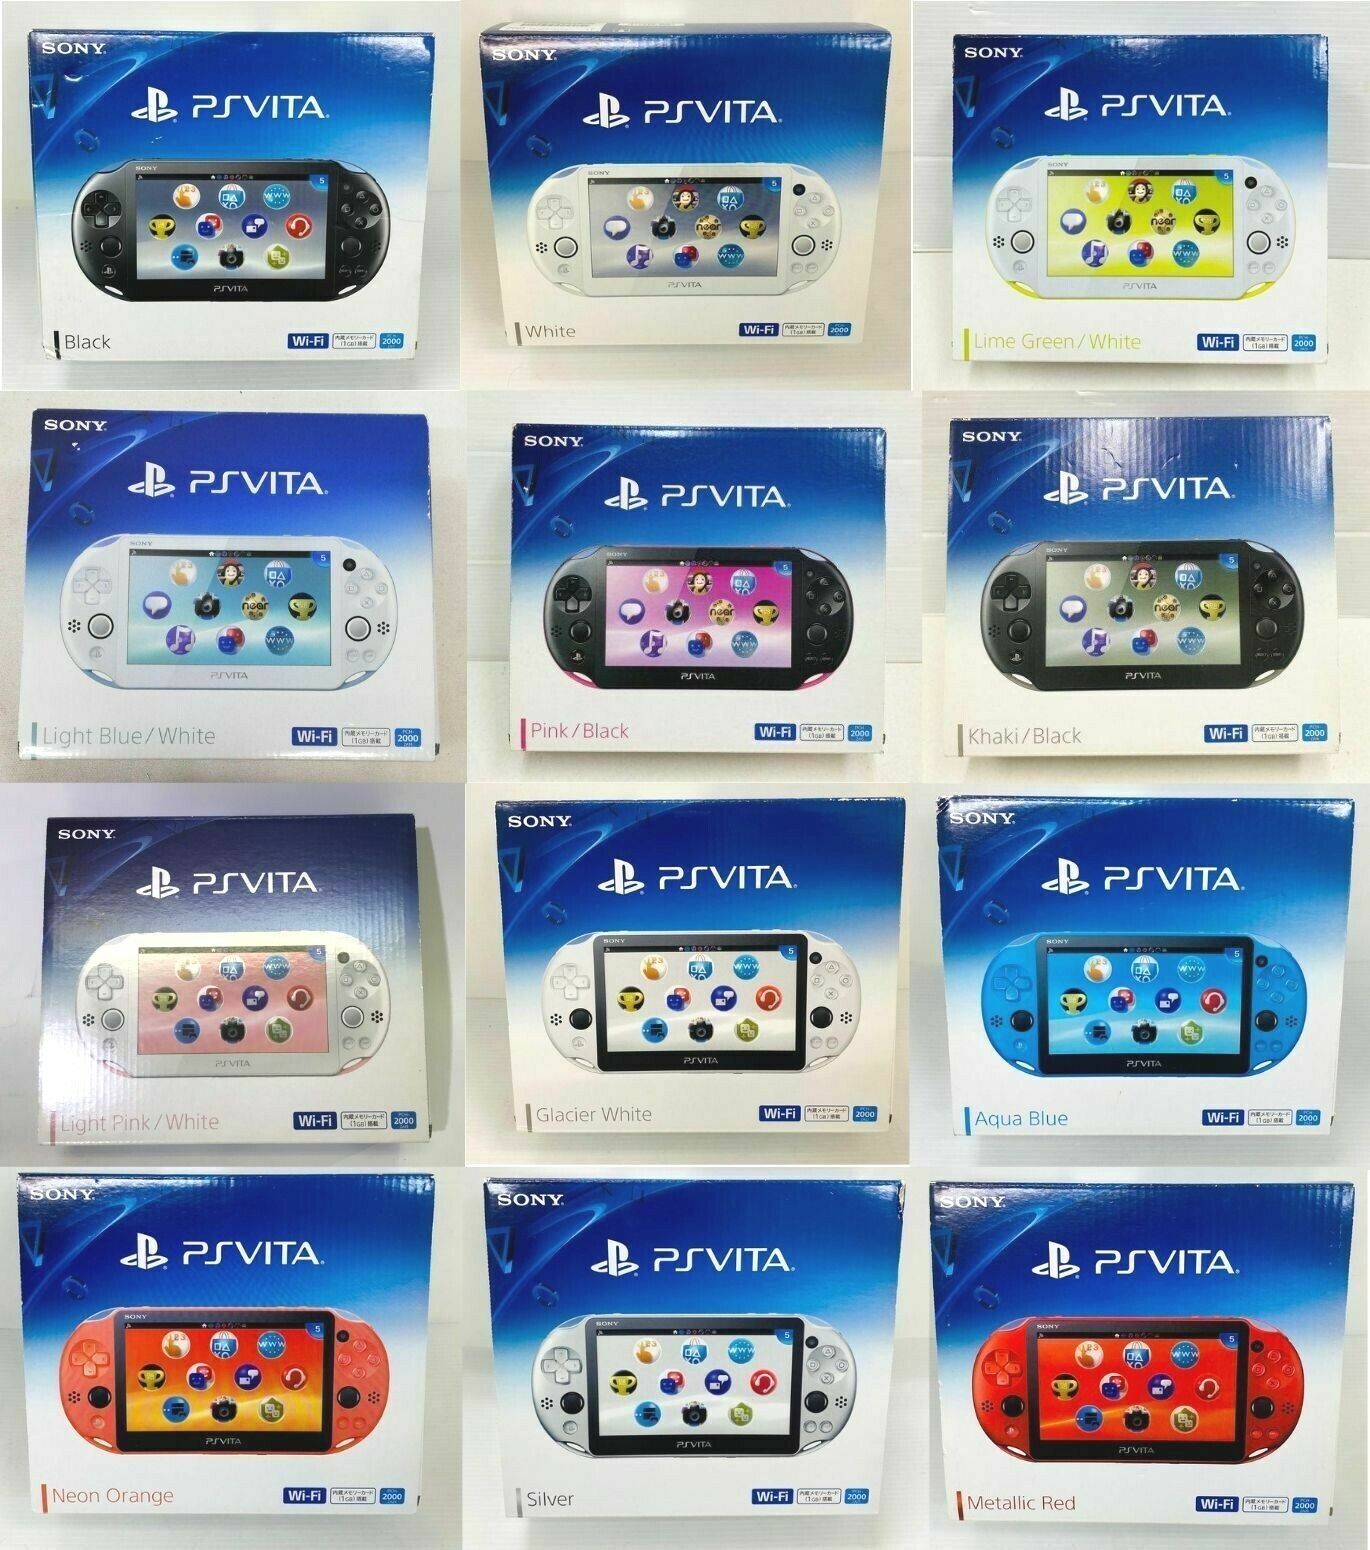 PS Vita PCH-2000 Sony Playstation Various Colors Unused | eBay